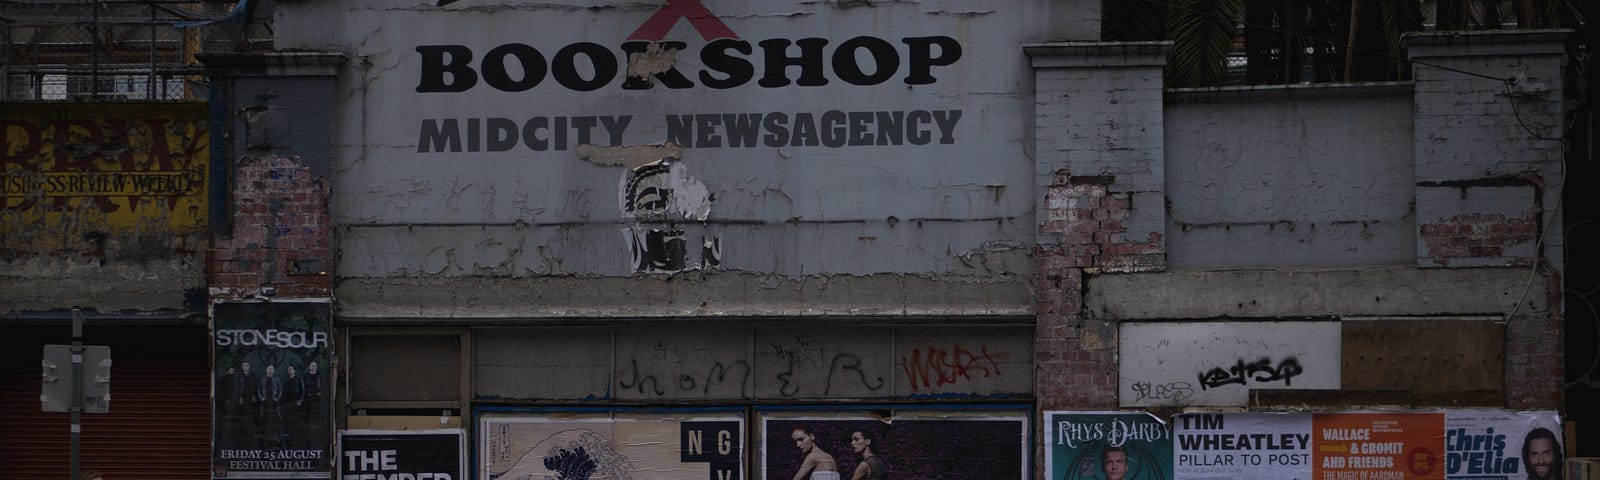 Liberated Bookshop Midcity NewsAgency